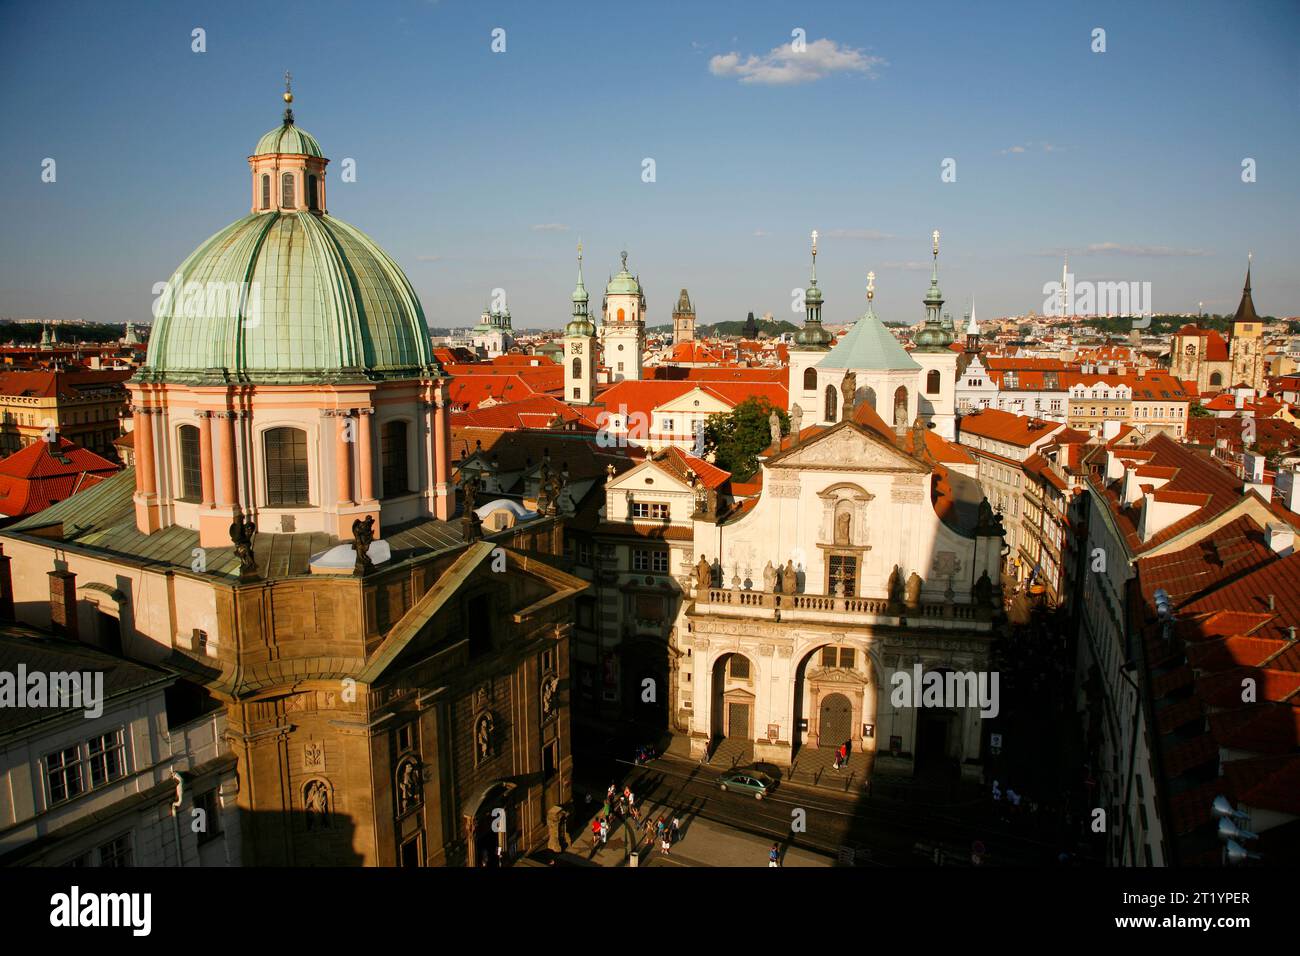 Krizovnicke Square with the Dome of St. Francis and Church of st. Salvator, Stare Mesto, Prague, Czech Republic. Stock Photo